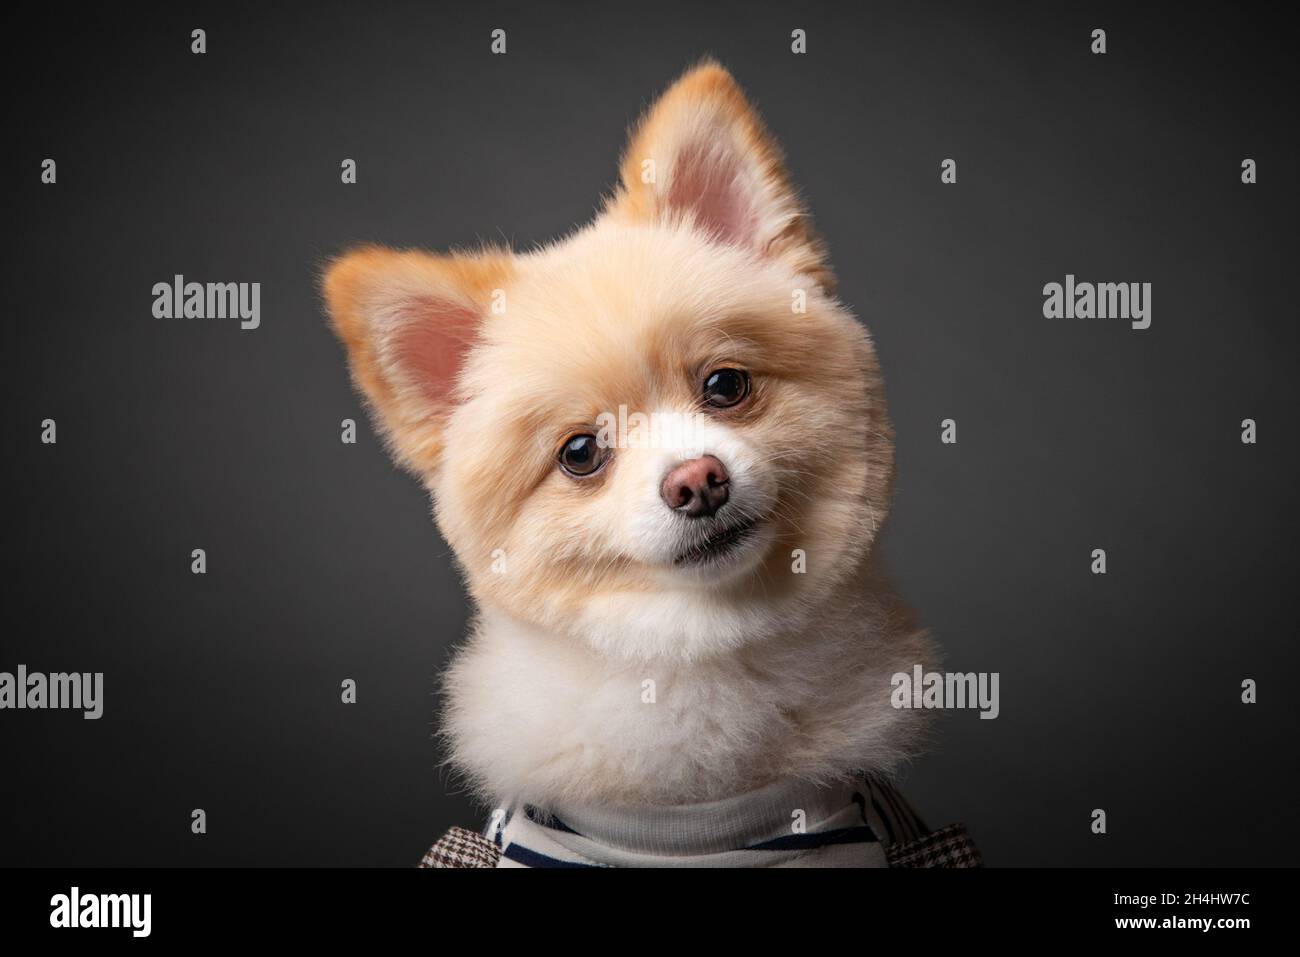 A smiley pomeranian who will always smile to brighten up your day. Stock Photo